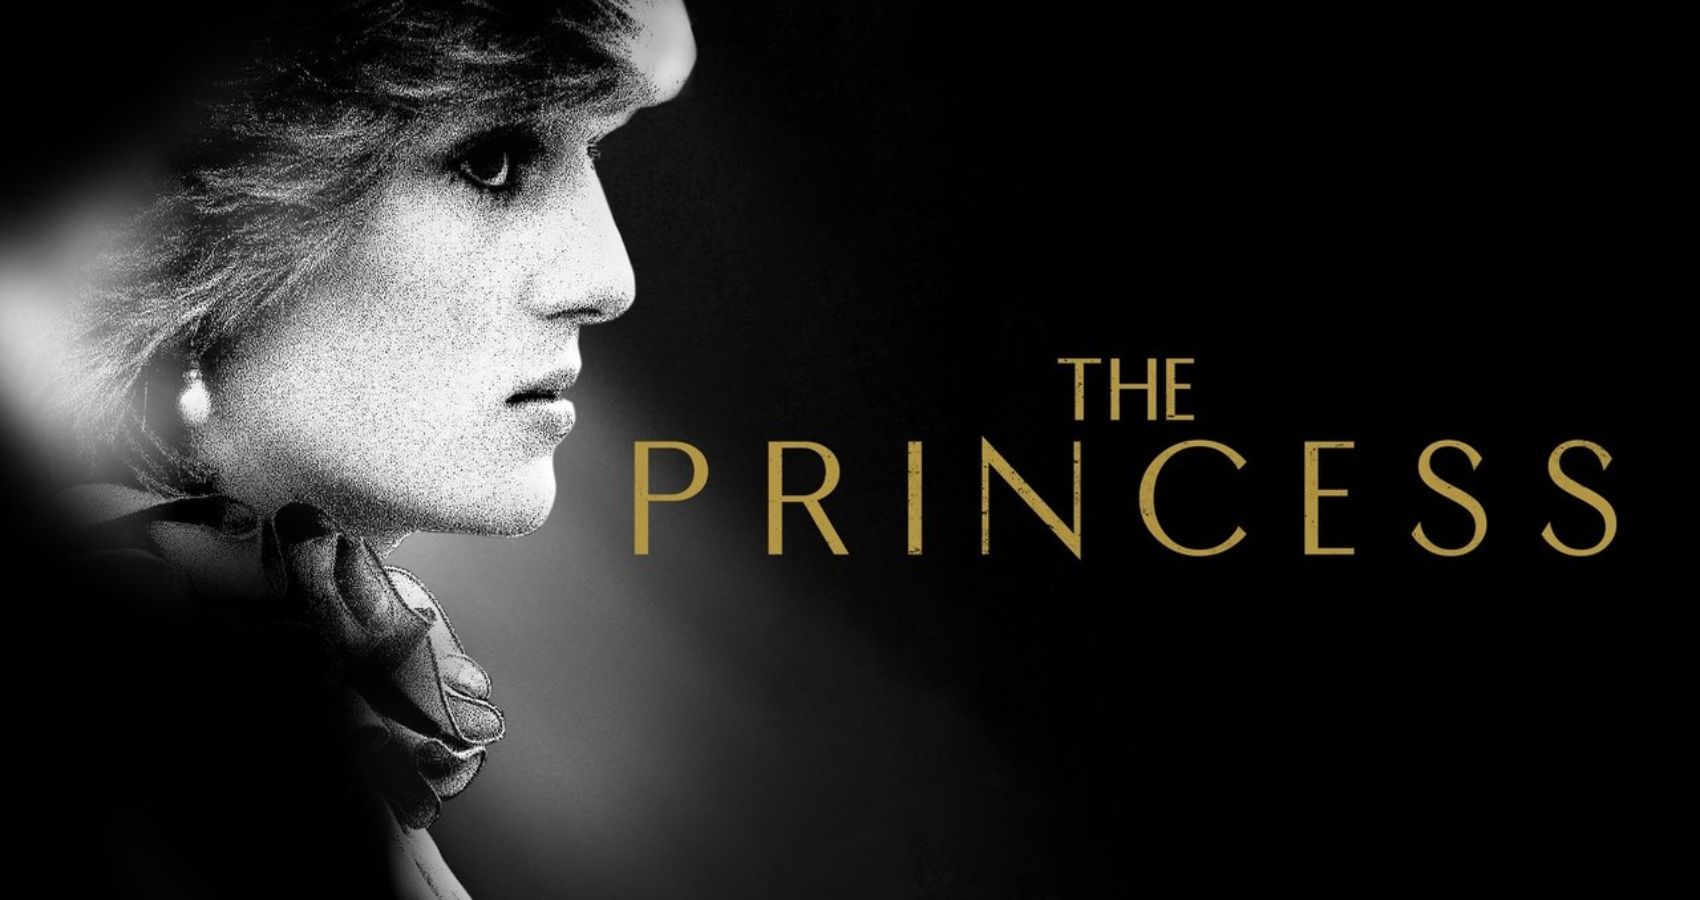 HBO's The Princess Poster